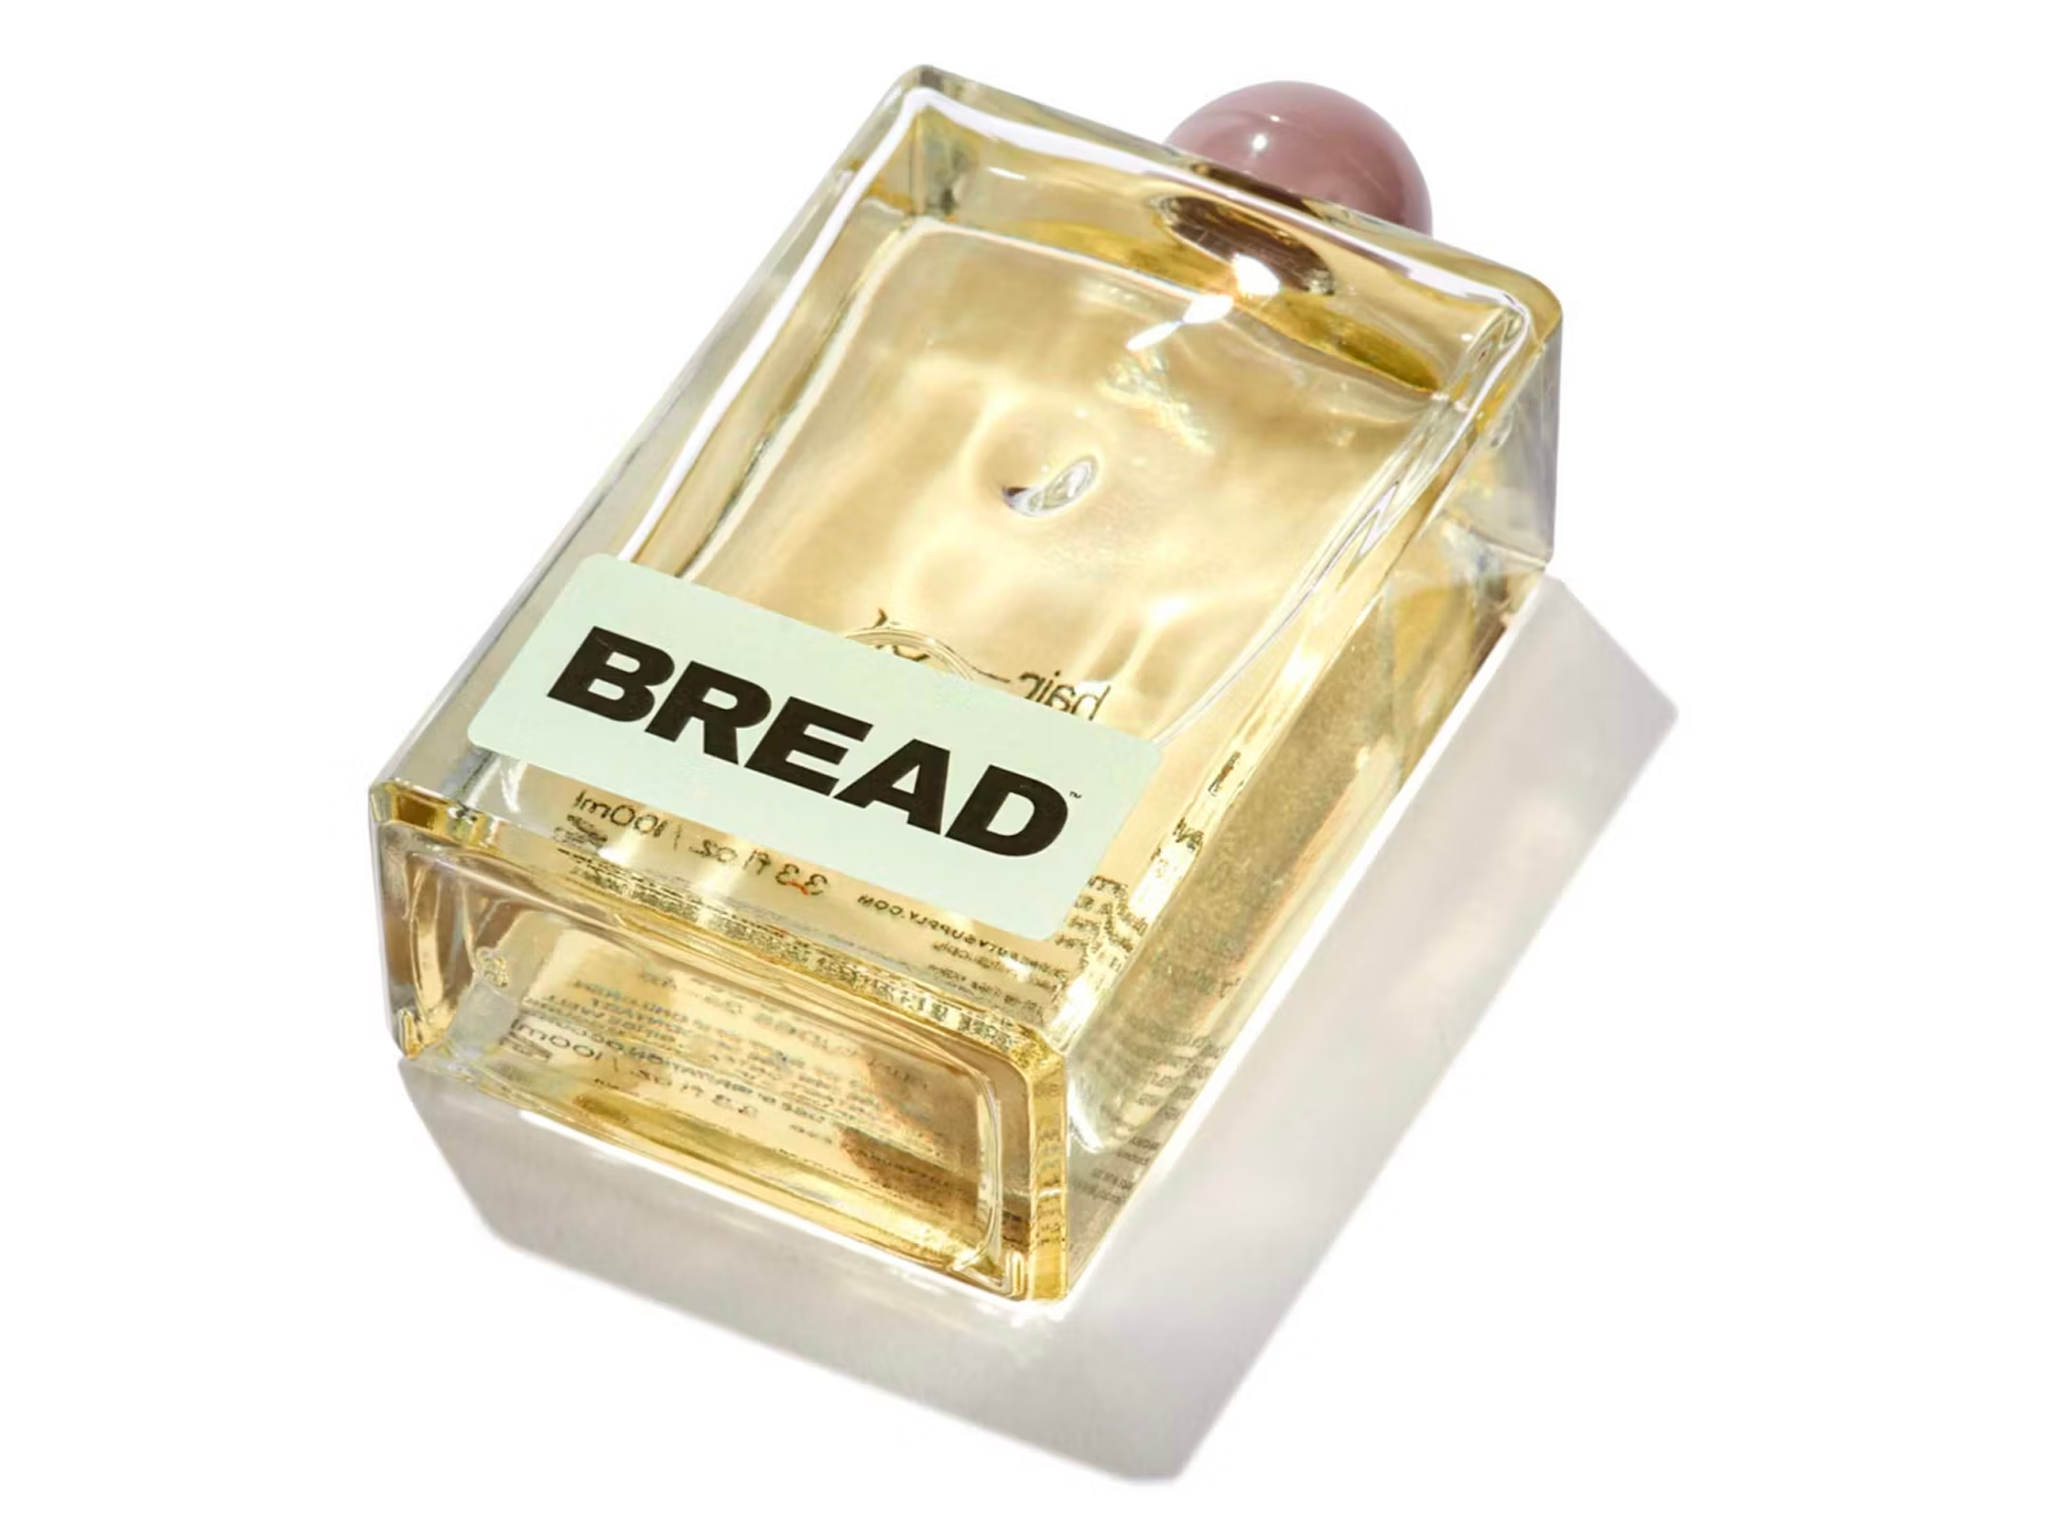 Bread-hair-oil-indybest